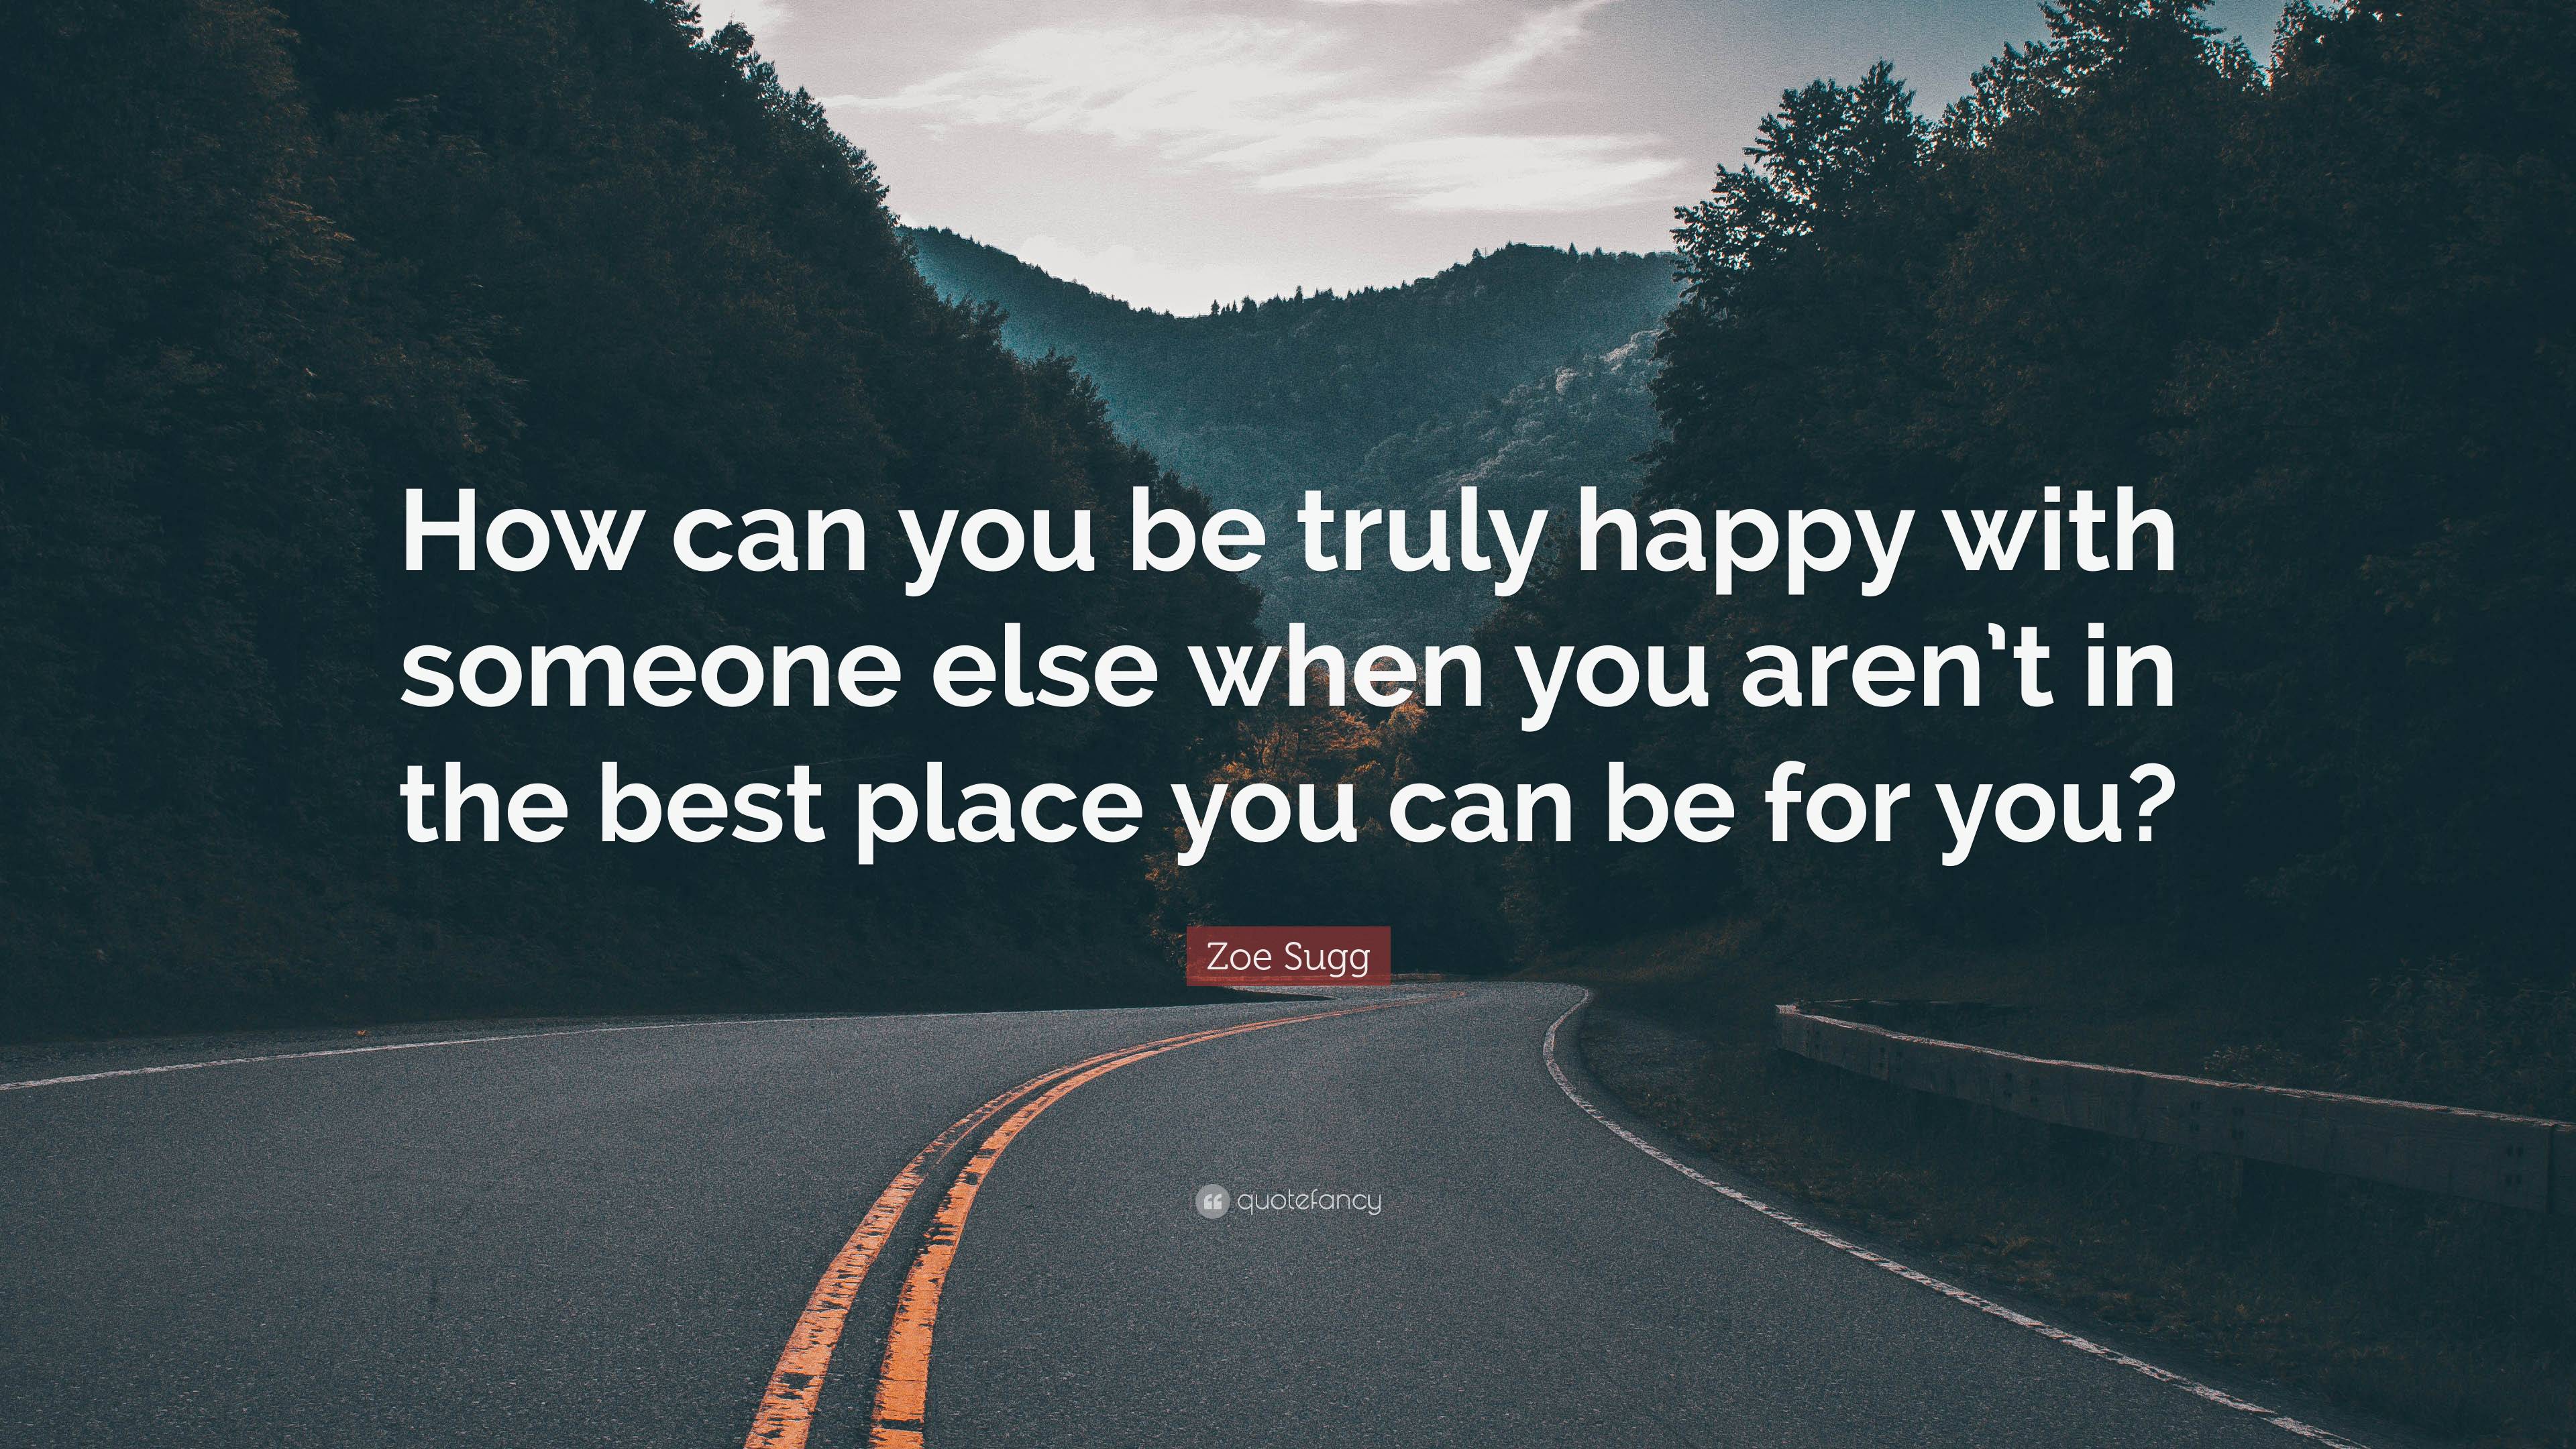 Zoe Sugg Quote: “How can you be truly happy with someone else when you ...